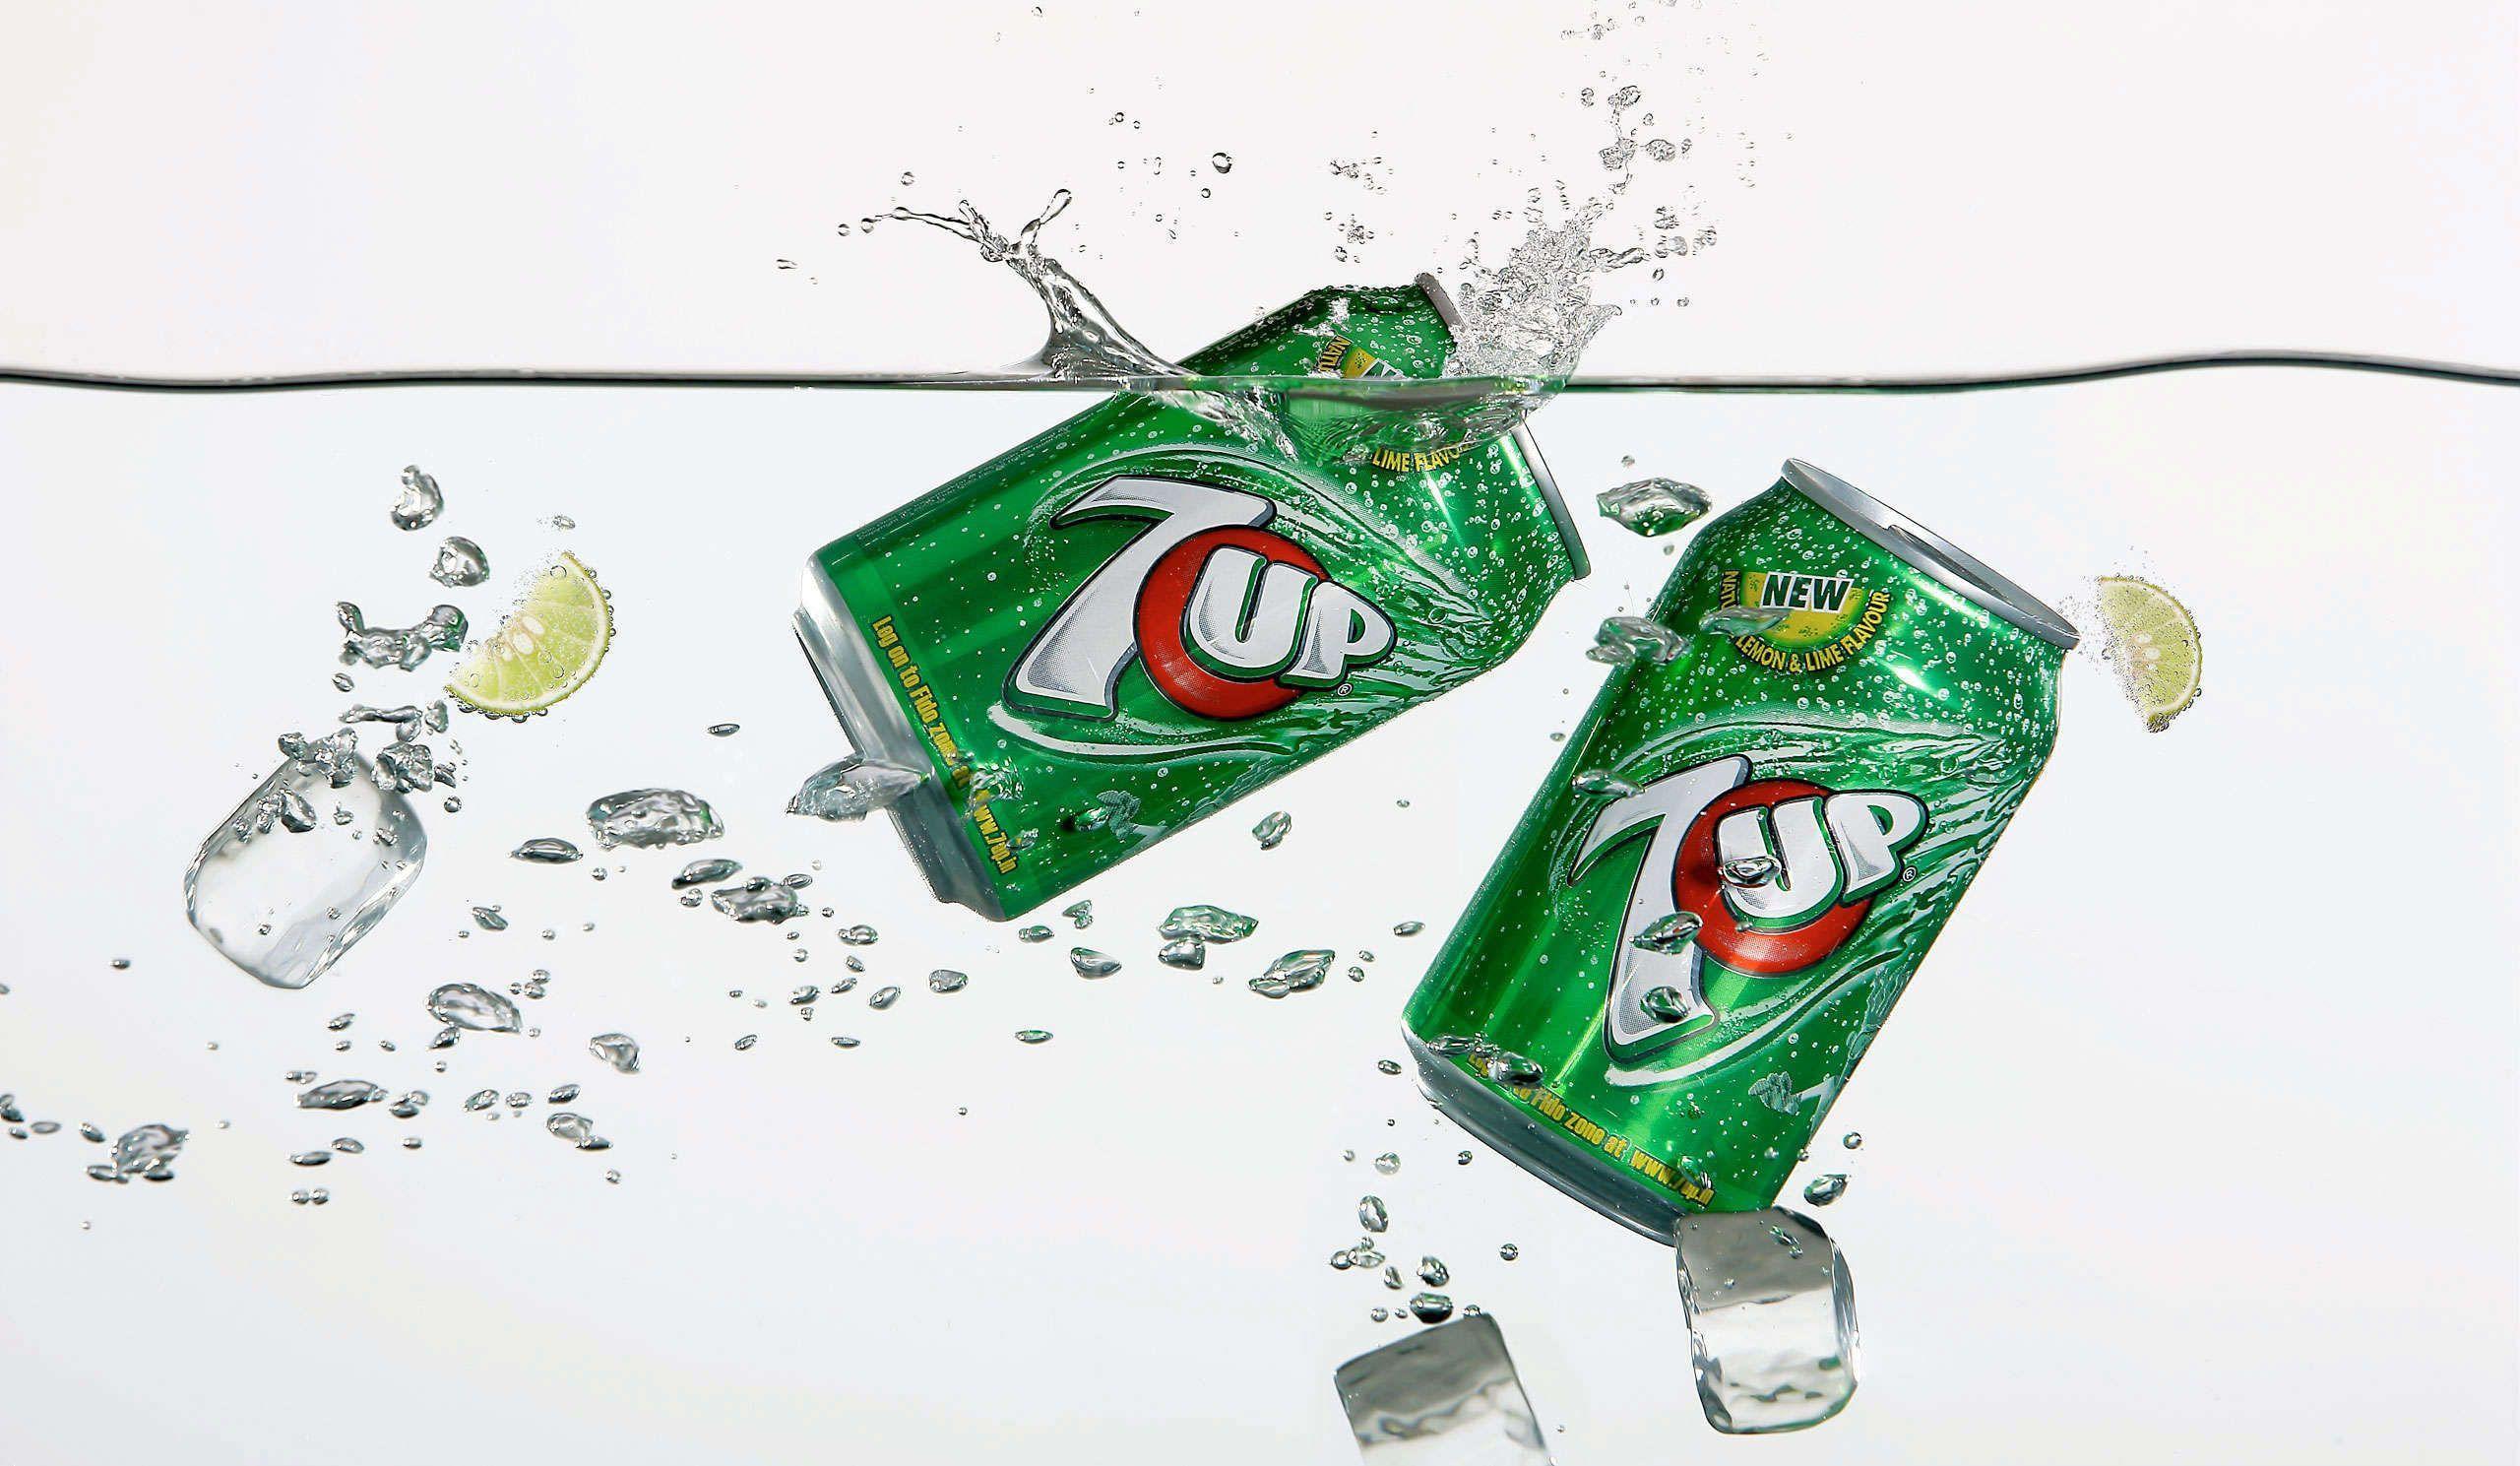 Seven UP HD Image